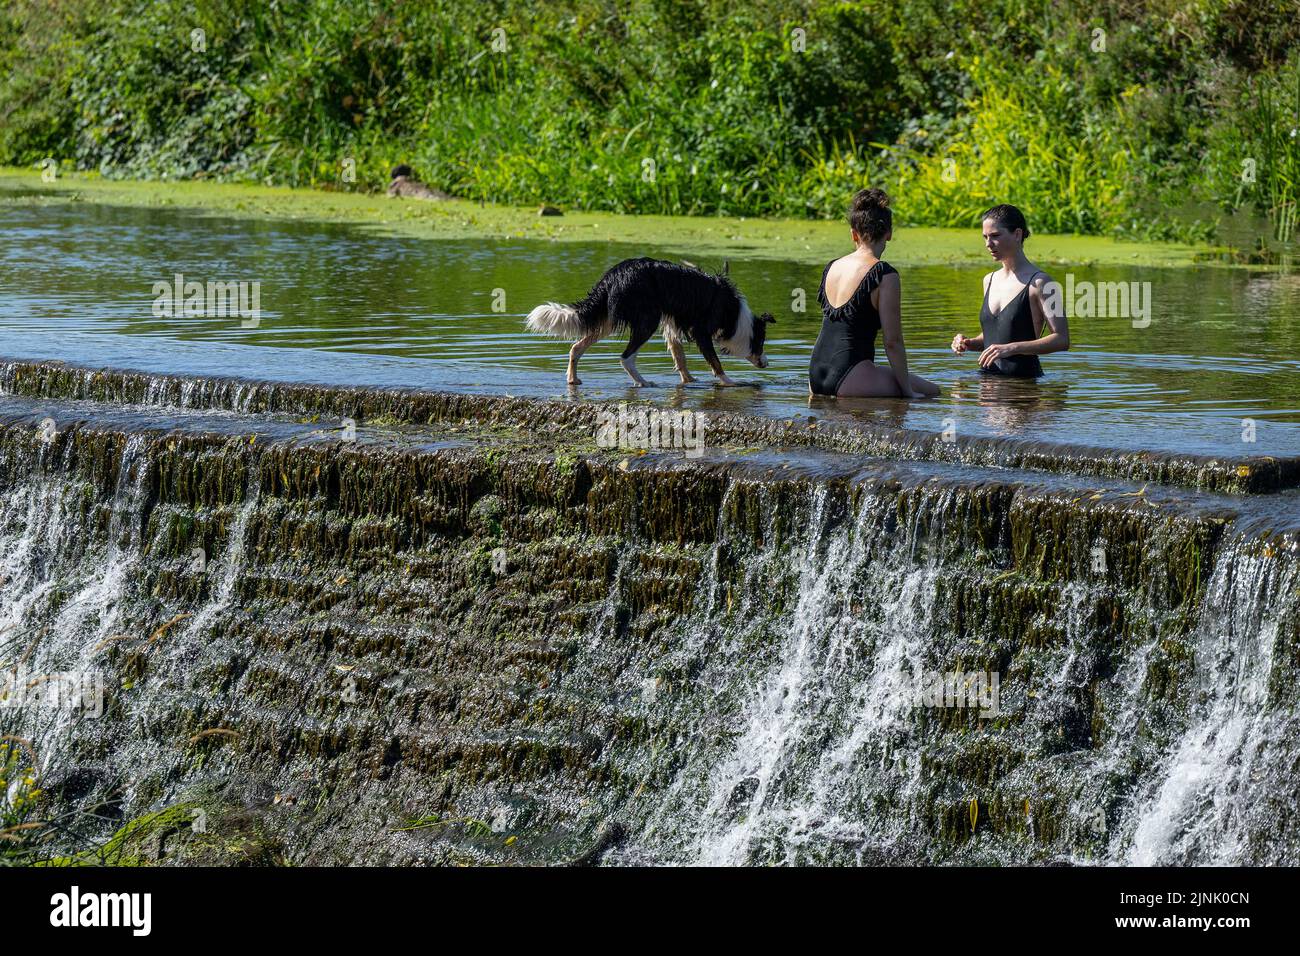 12.08.22. WEATHER SOMERSET.  People enjoy the water at Warleigh Weir on the River Avon near Bath in Somerset as temperatures continue to soar across t Stock Photo